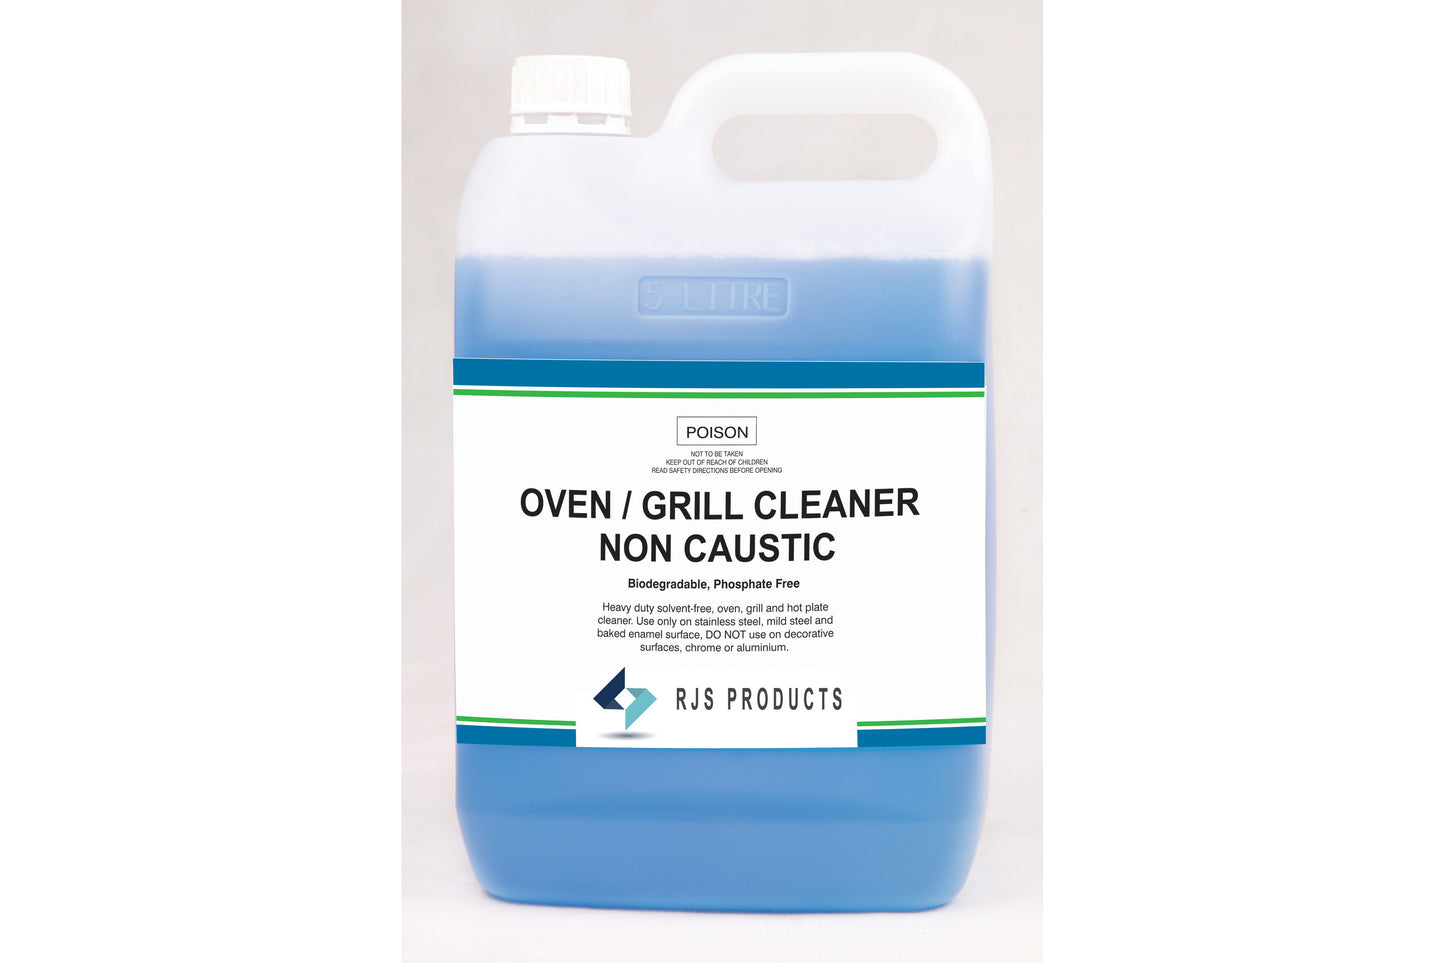 Oven/Grill Cleaner - Non Caustic